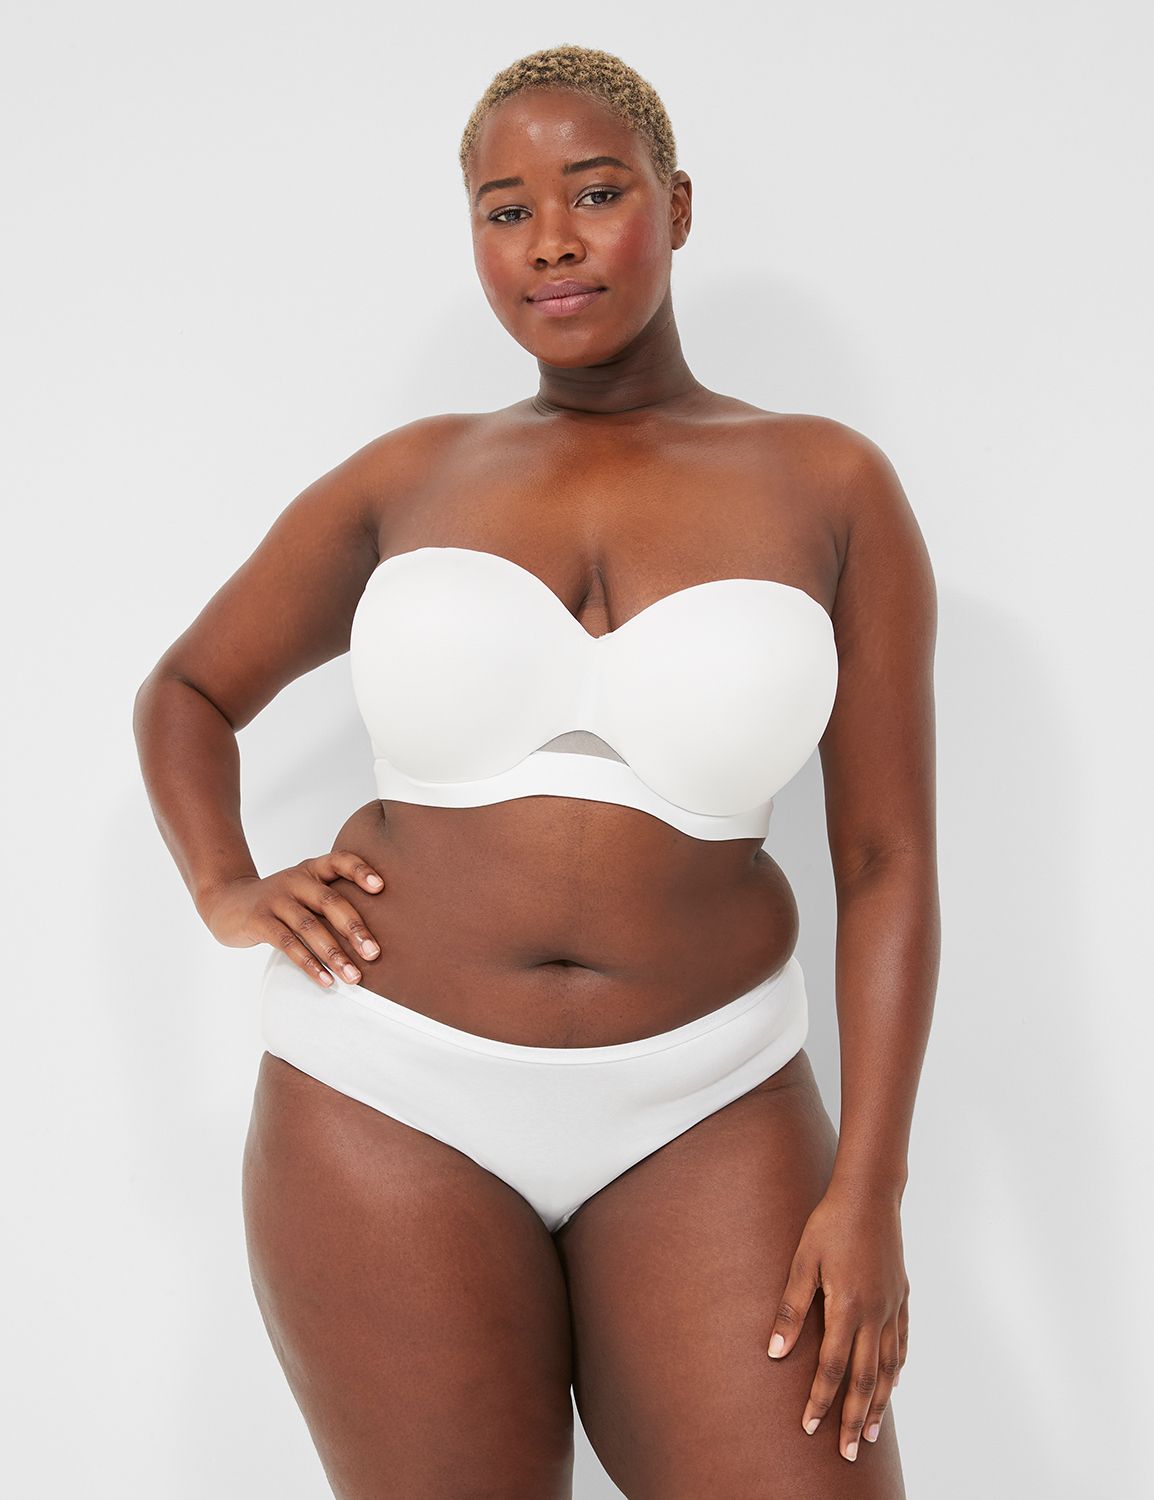 Take it from @ohsnapitschardline, the Comfort Bliss strapless is the O